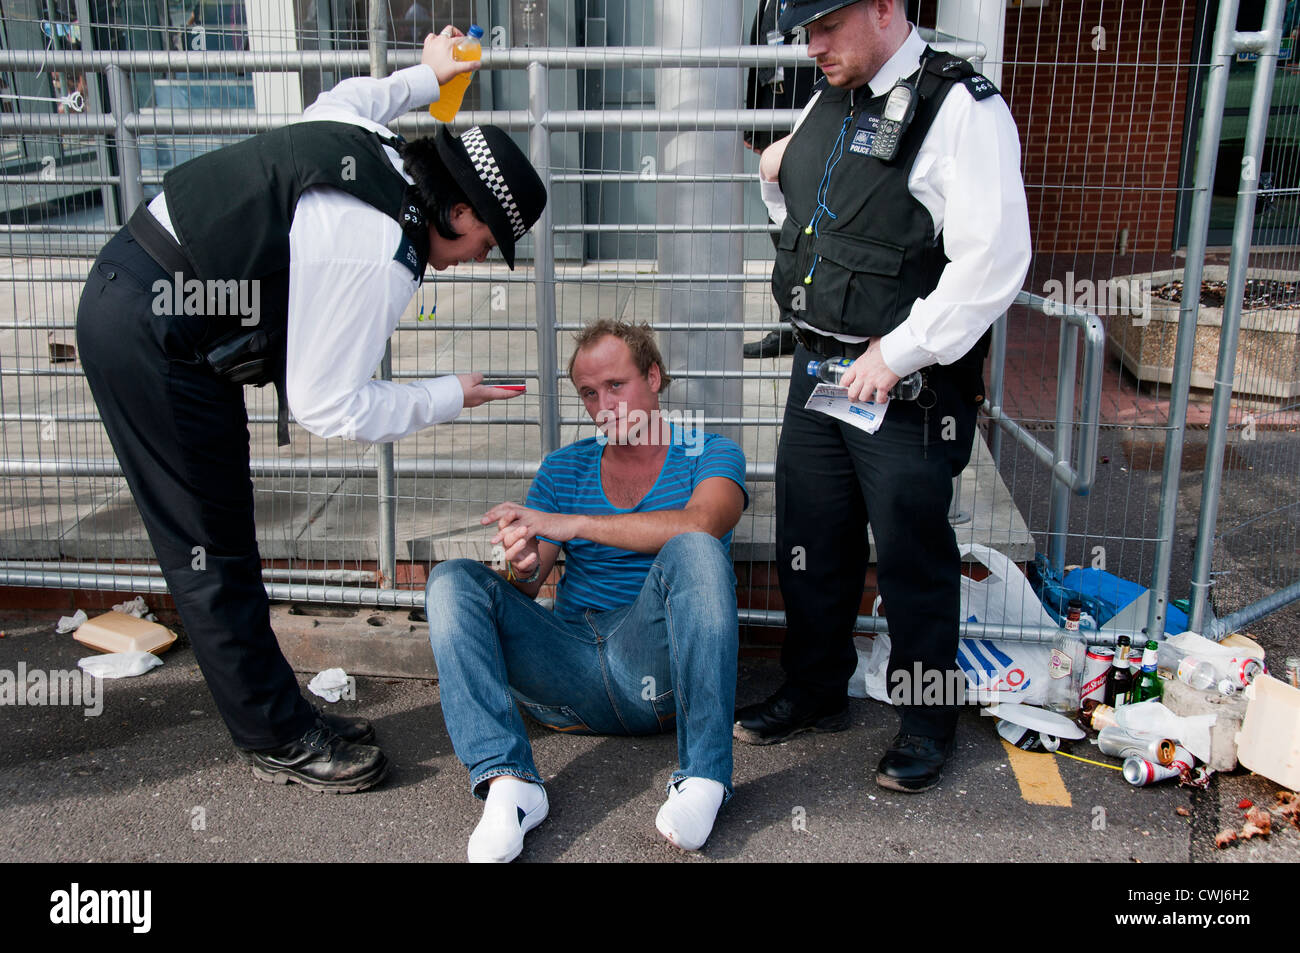 Young man who overdid alcohol & partying at Notting Hill Carnival celebrations questioned & helped by police Stock Photo